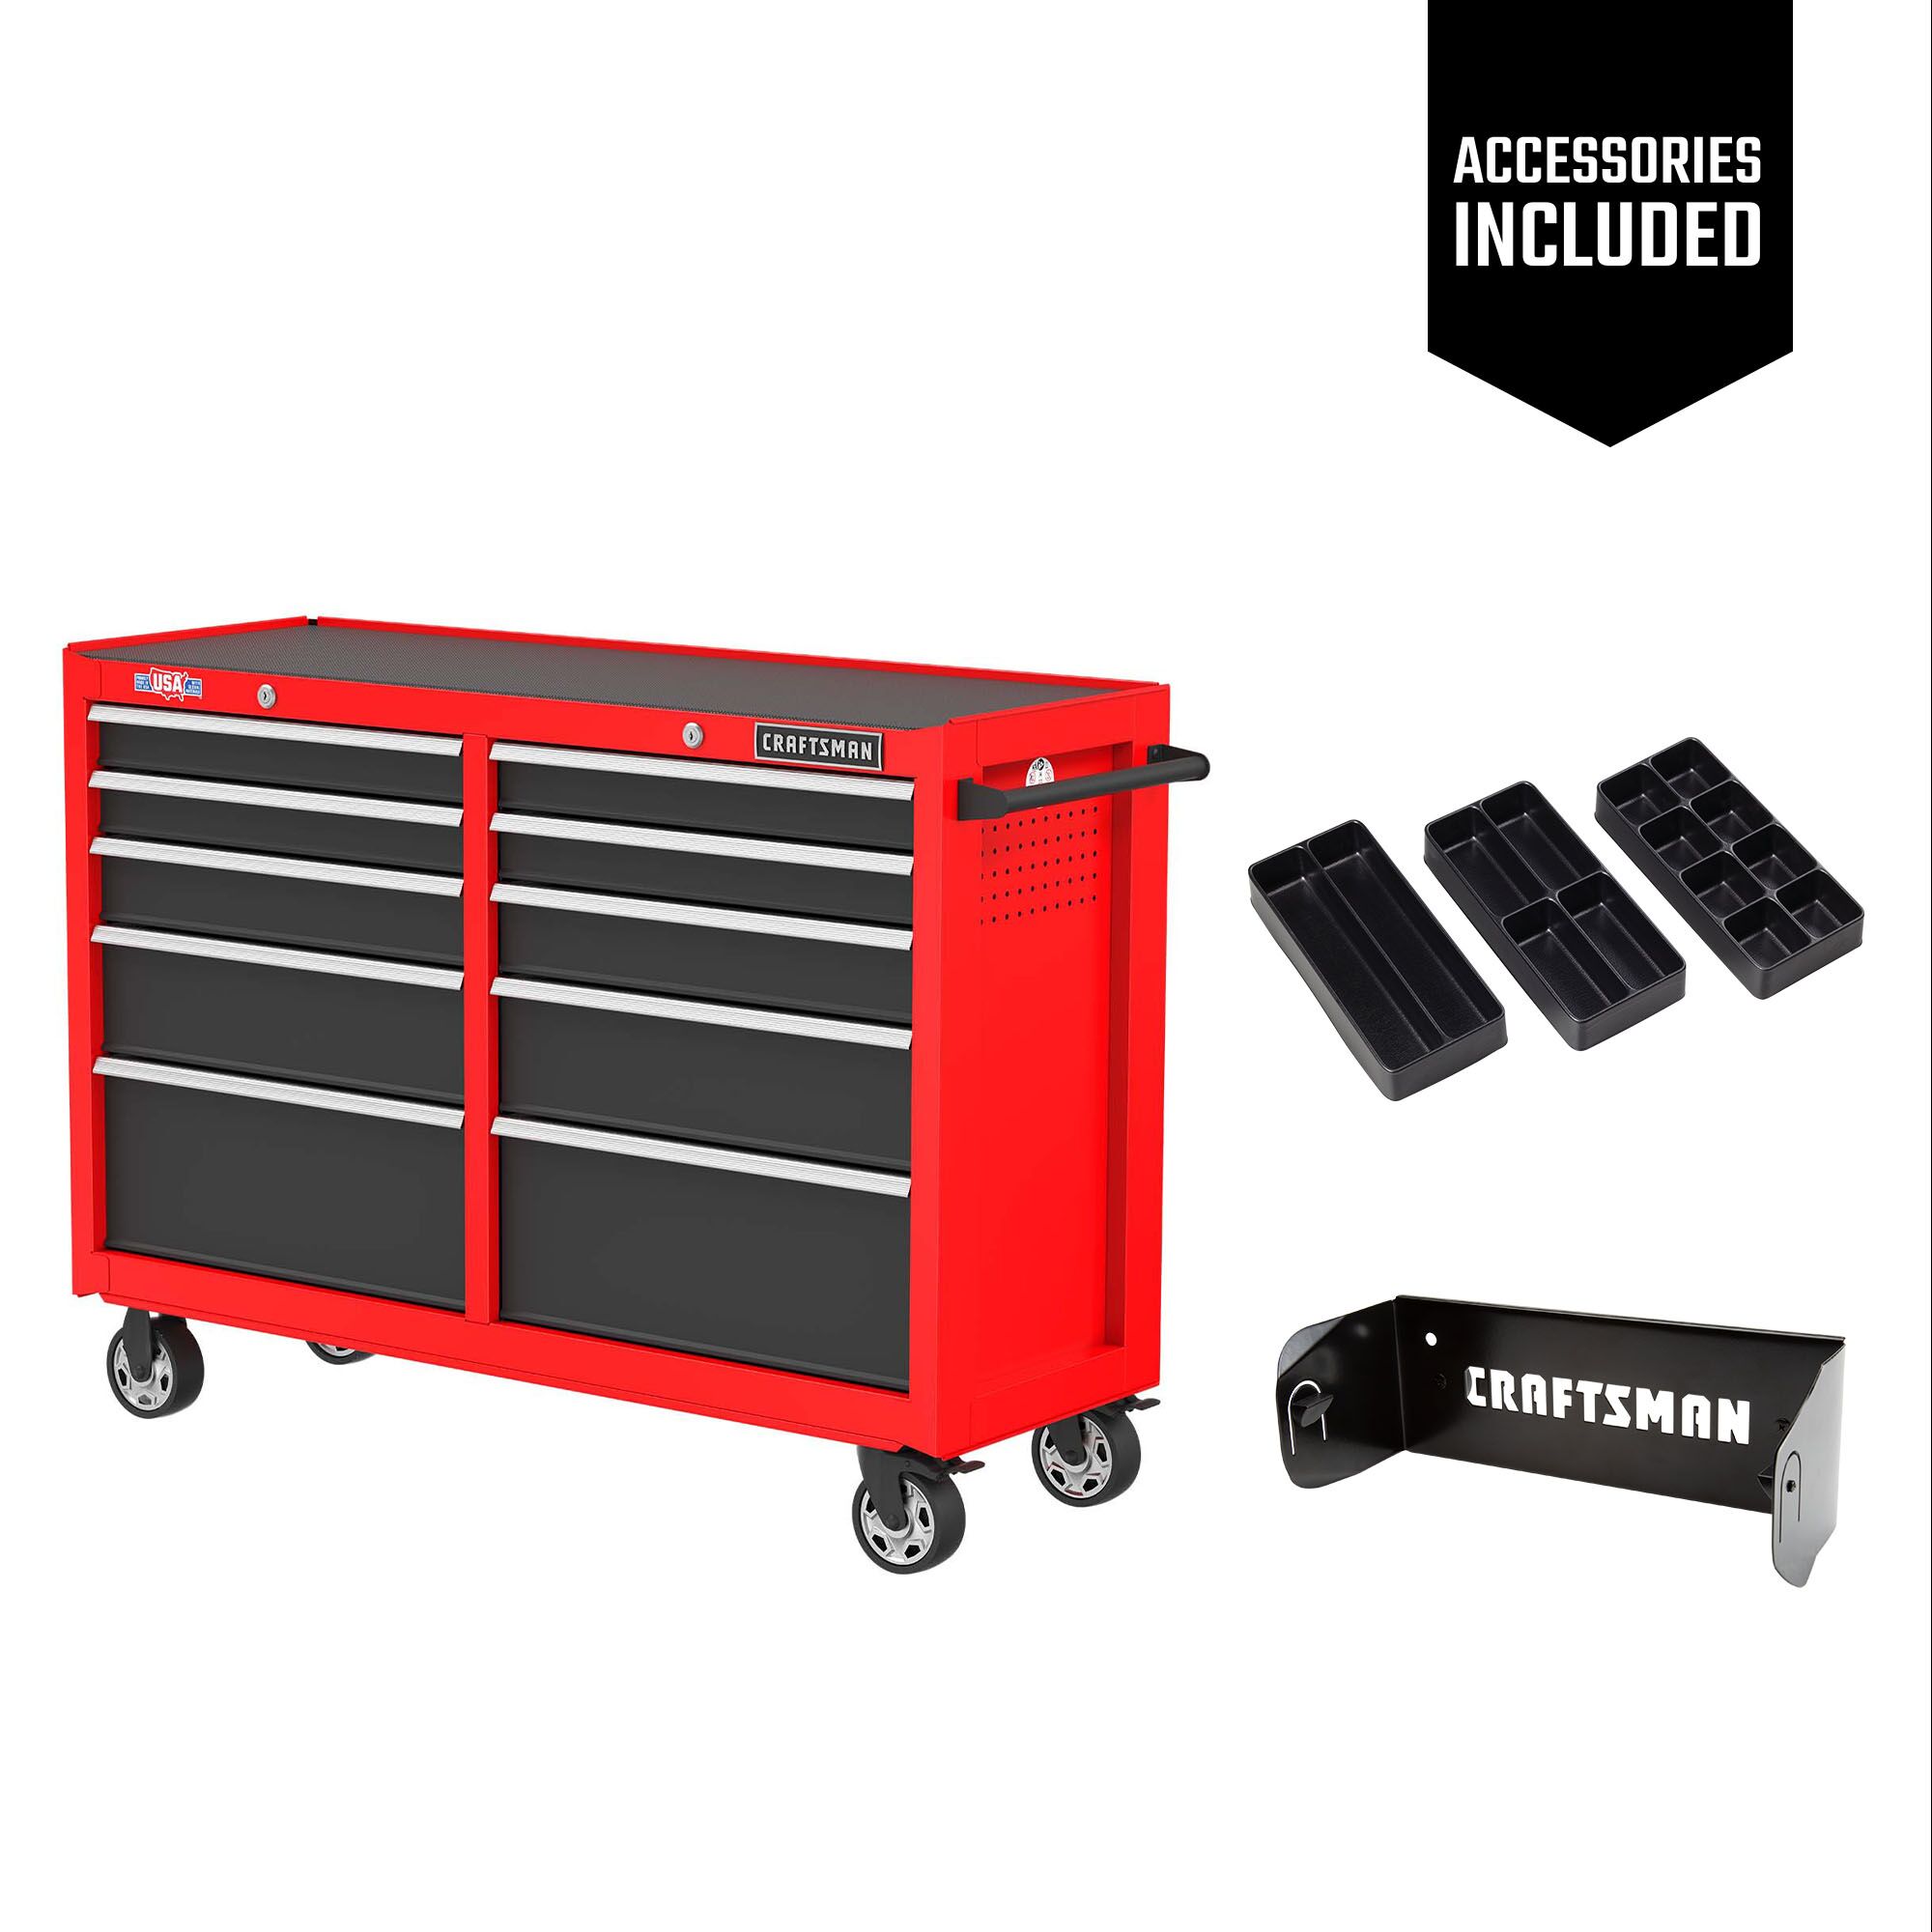 One red CRAFTSMAN 52 inch Wide 10-Drawer Rolling Tool Cabinet with three black Cabinet Drawer Trays and one black Magnetic Paper Towel Holder included